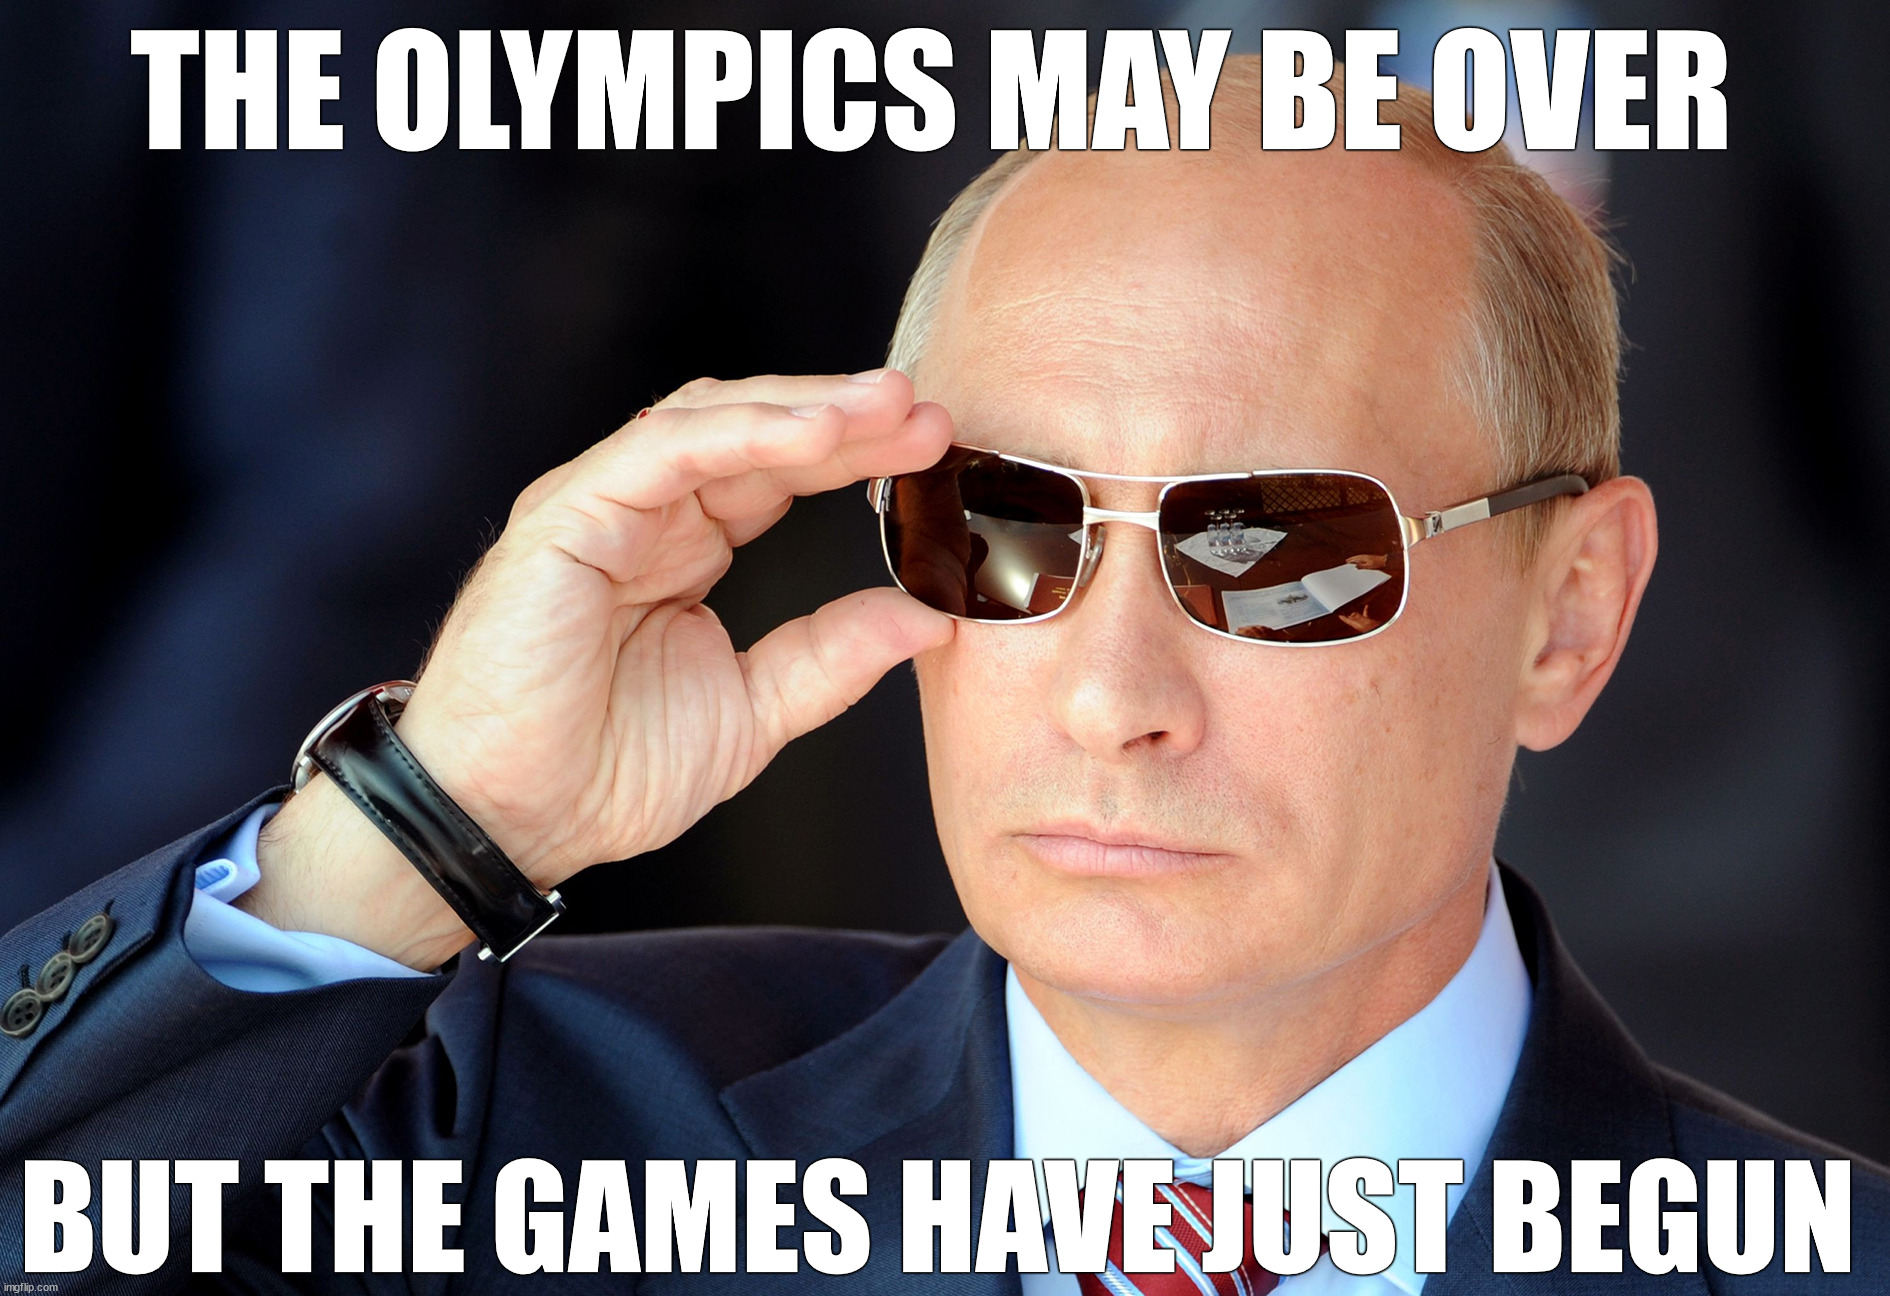 Russian Prime Minister Vladimir Putin adjusts his cool sunglasses at Airshow AUG2011 | THE OLYMPICS MAY BE OVER; BUT THE GAMES HAVE JUST BEGUN | image tagged in russia,vladimir putin,winter olympics,2022,ukraine,ww3 | made w/ Imgflip meme maker